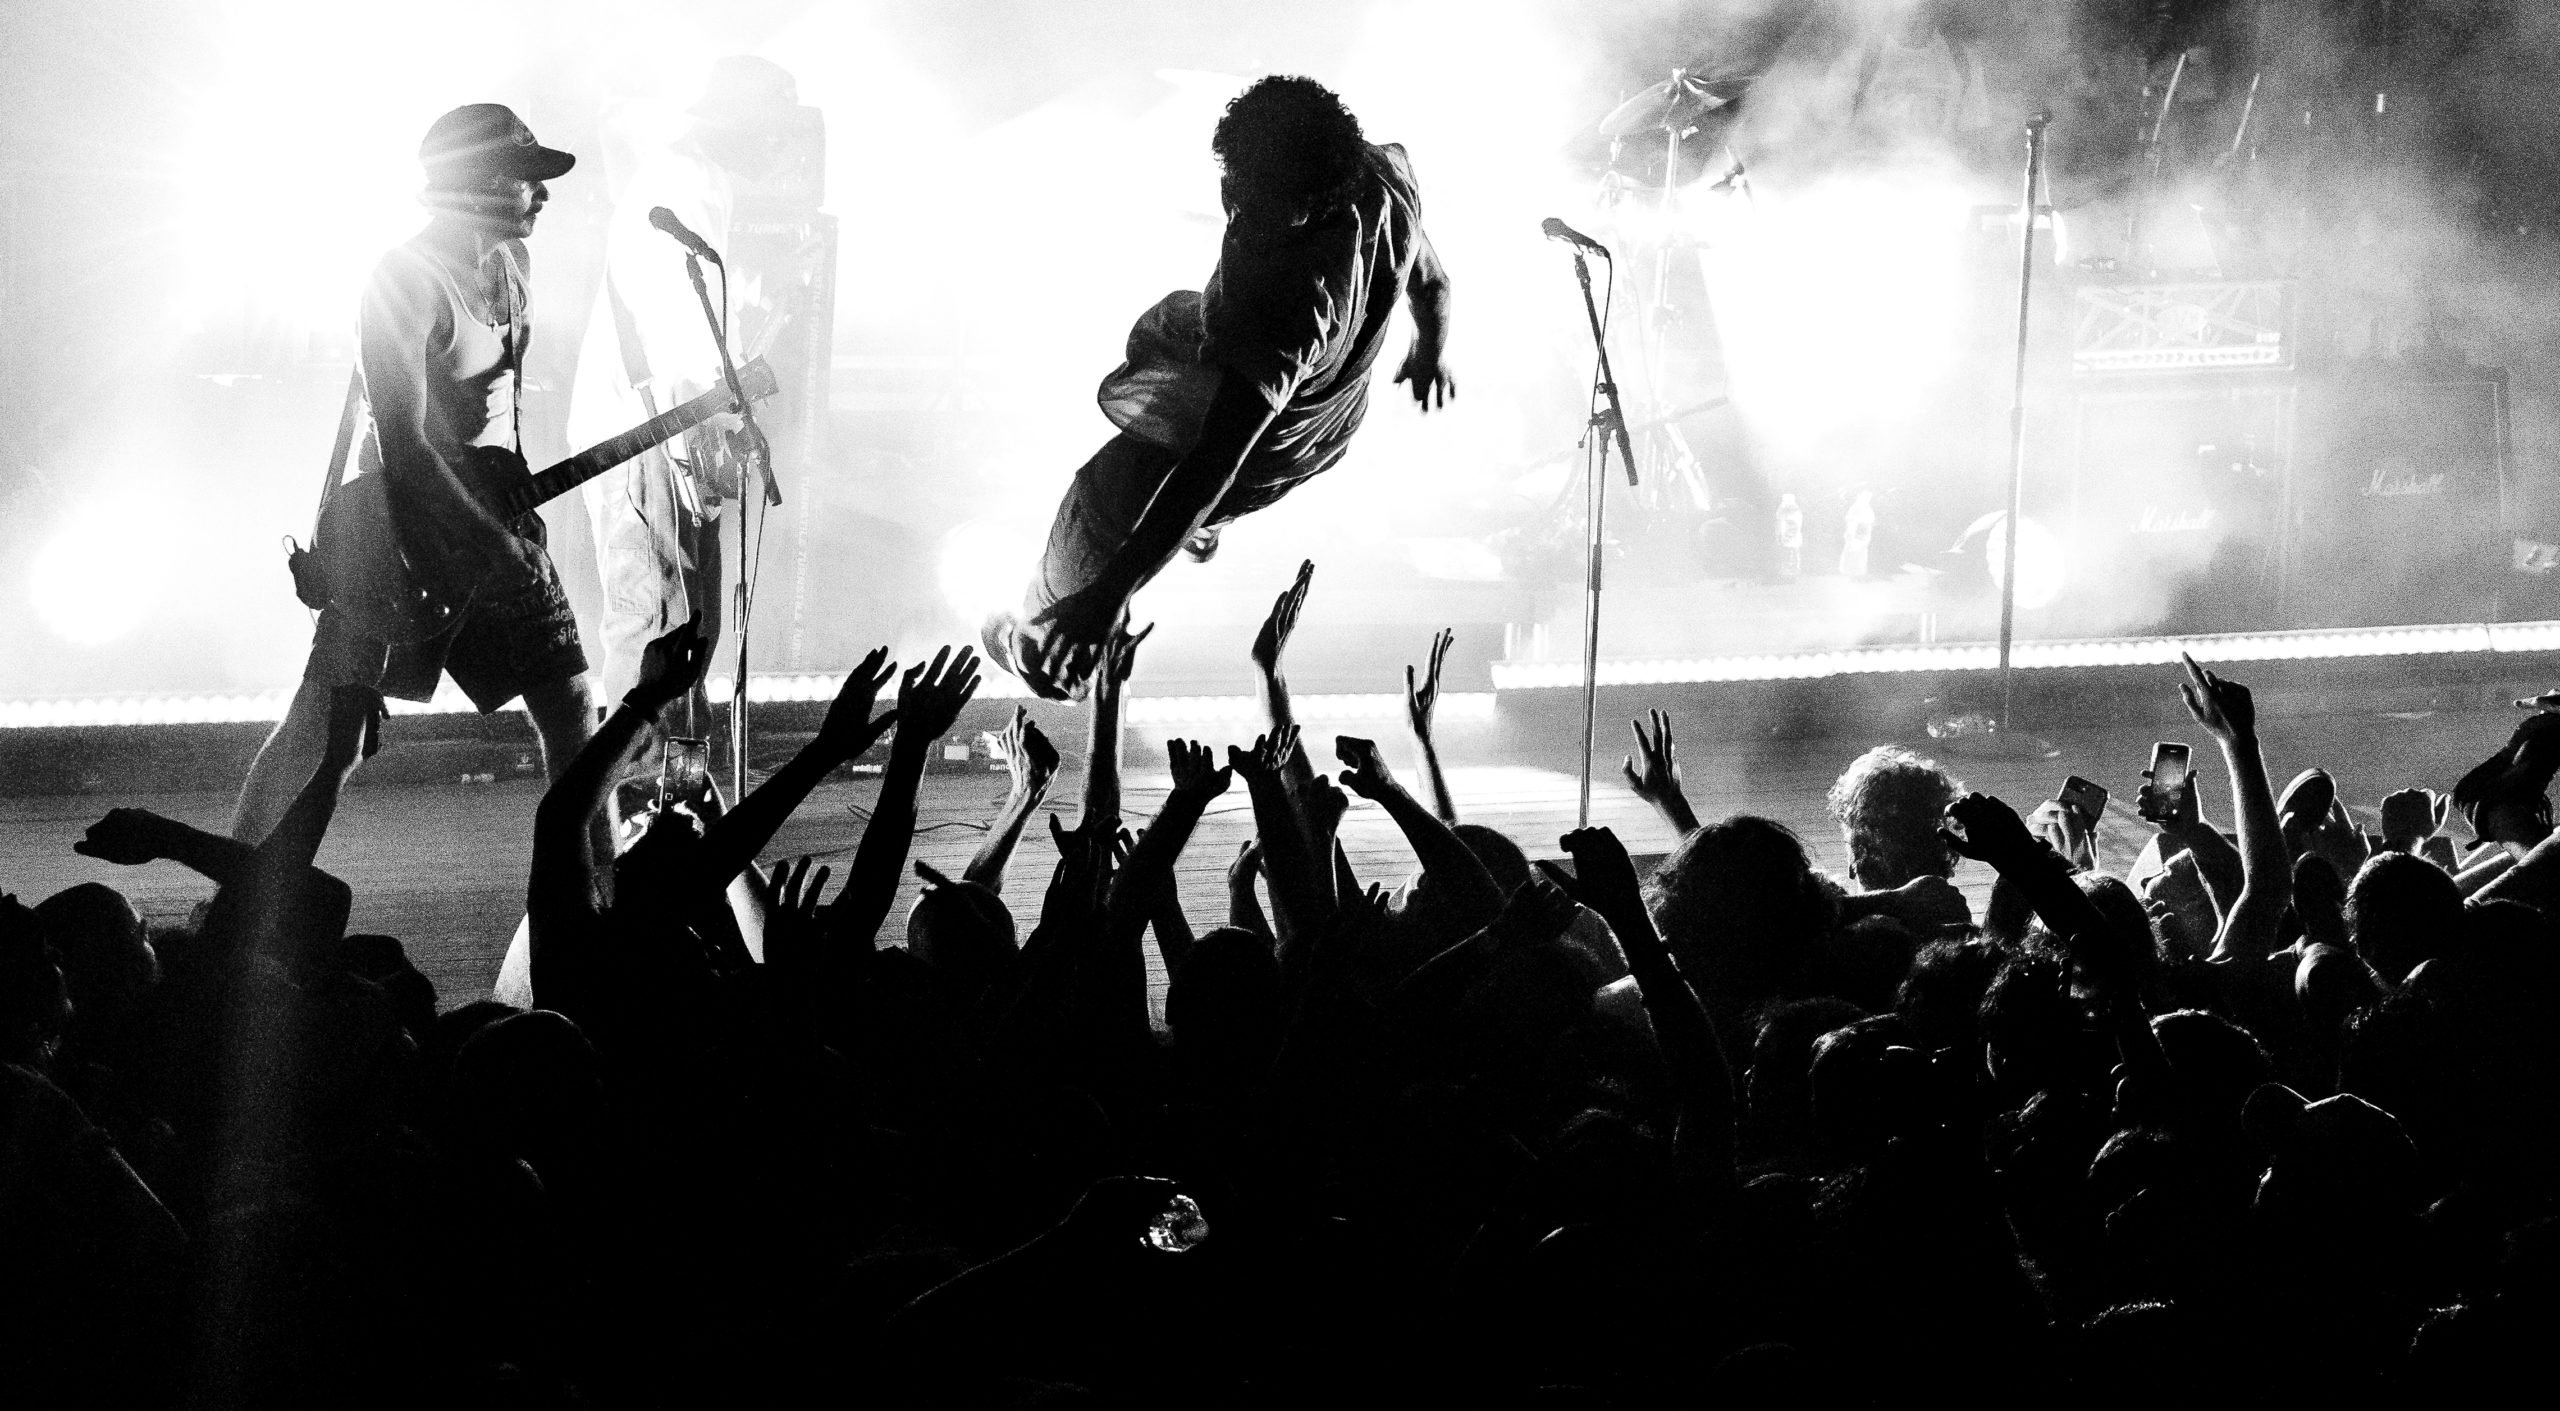 A black and white photo of a stage diver leaping into a crowd, who have their hands outstretched to catch the diver. In the background, a band plays hardcore music.